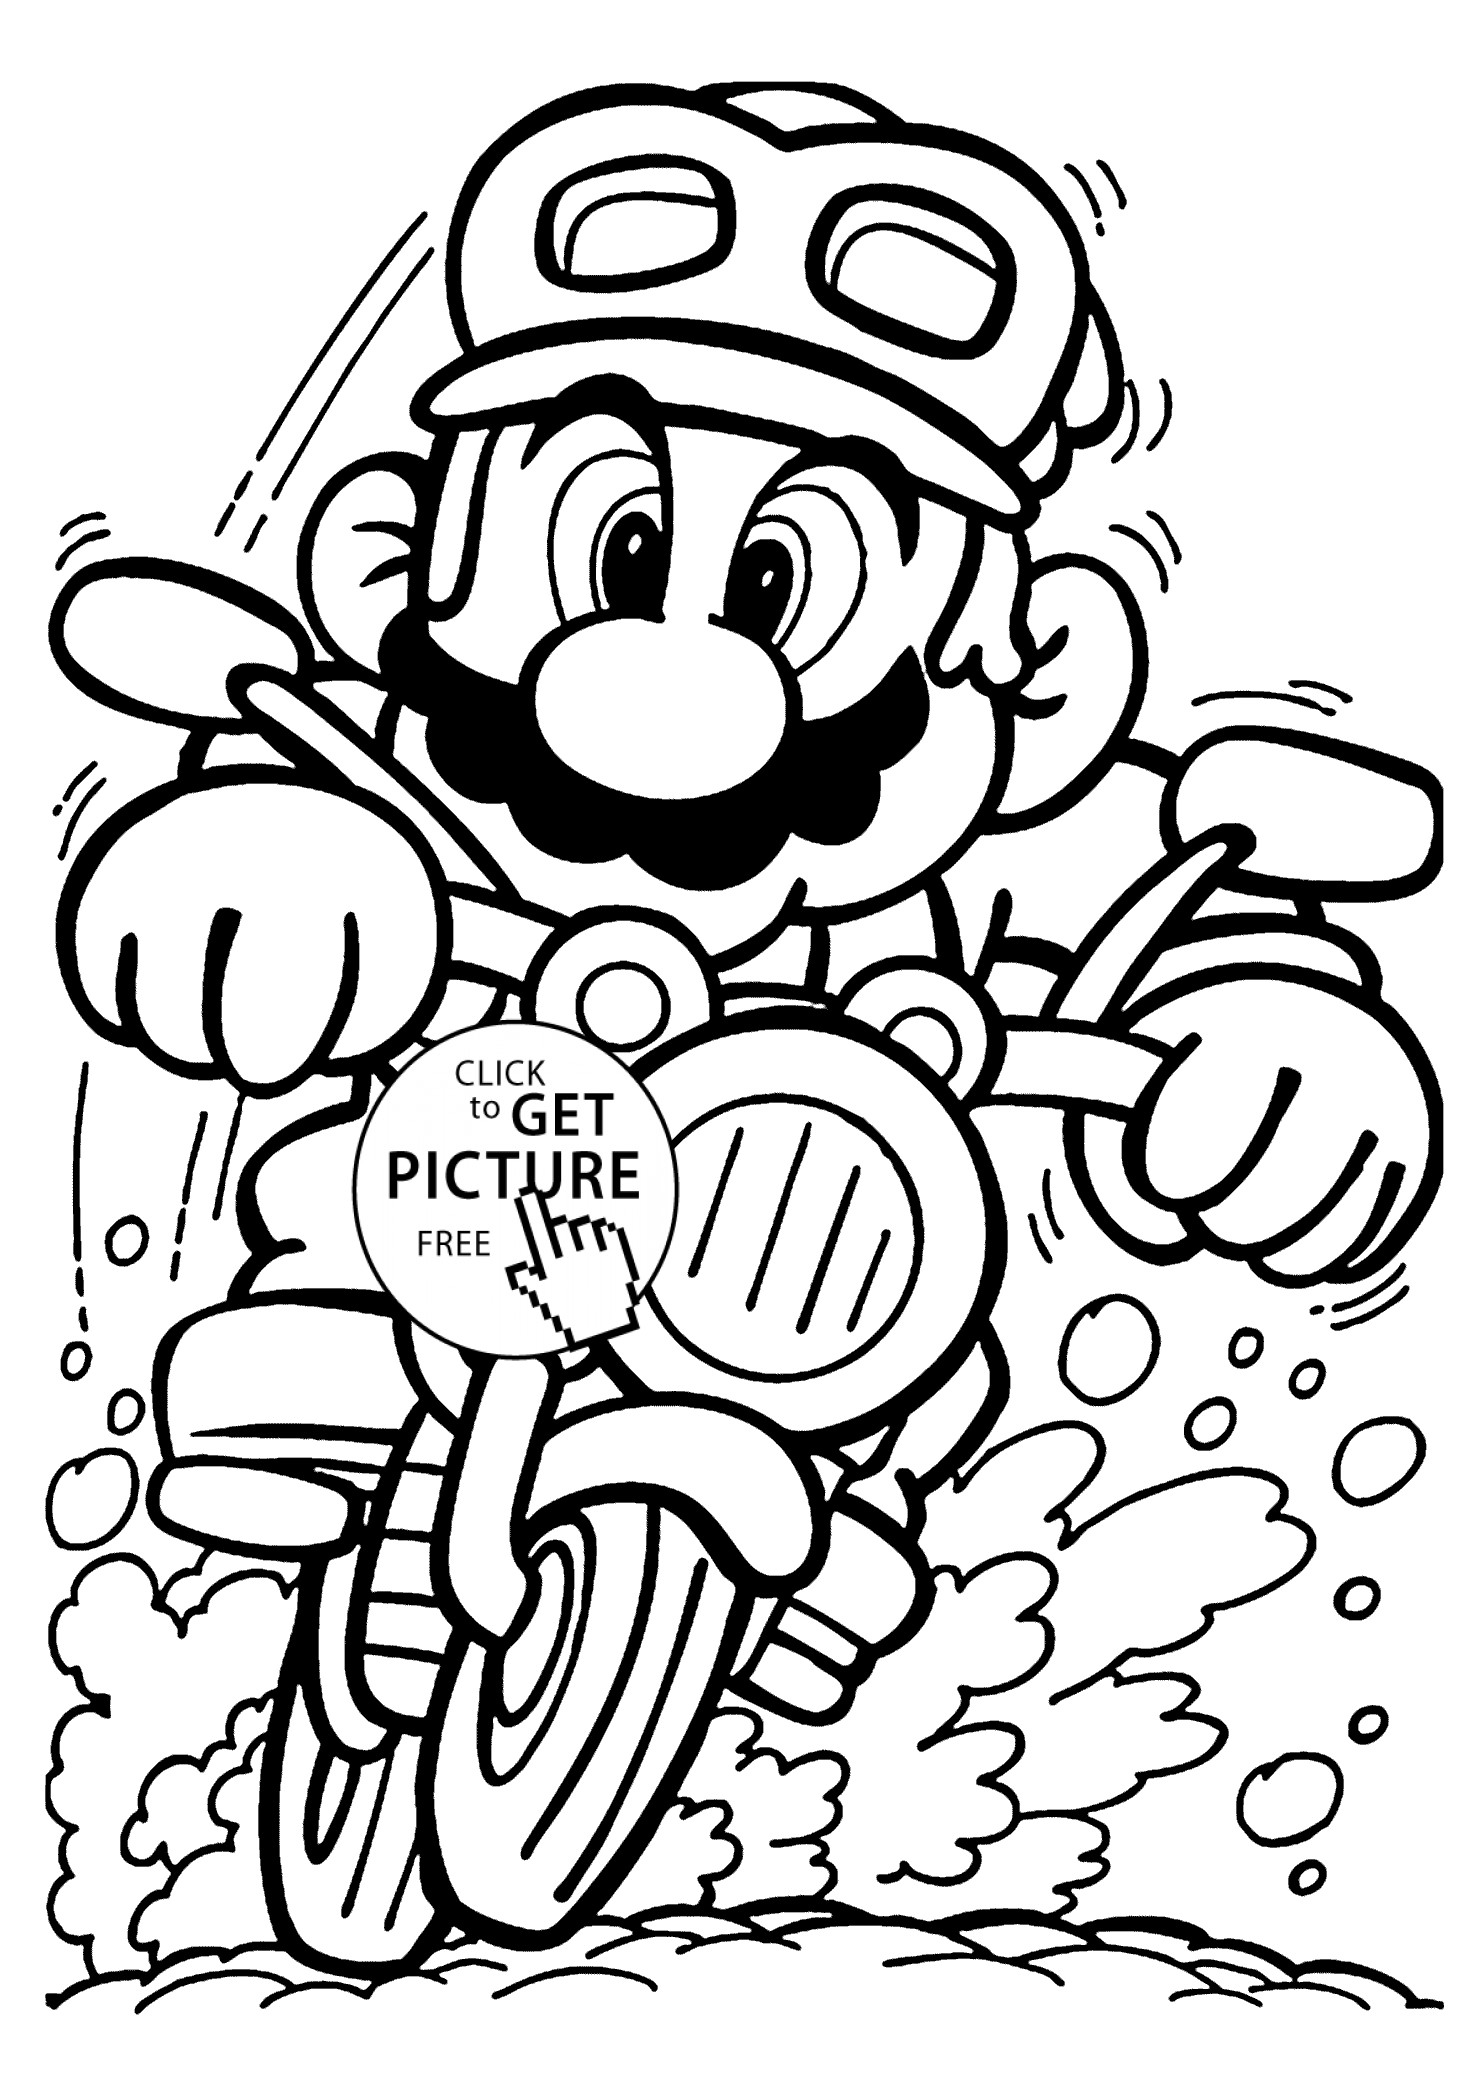 Mario Coloring Pages For Kids
 Mario on motorcycle coloring pages for kids printable free